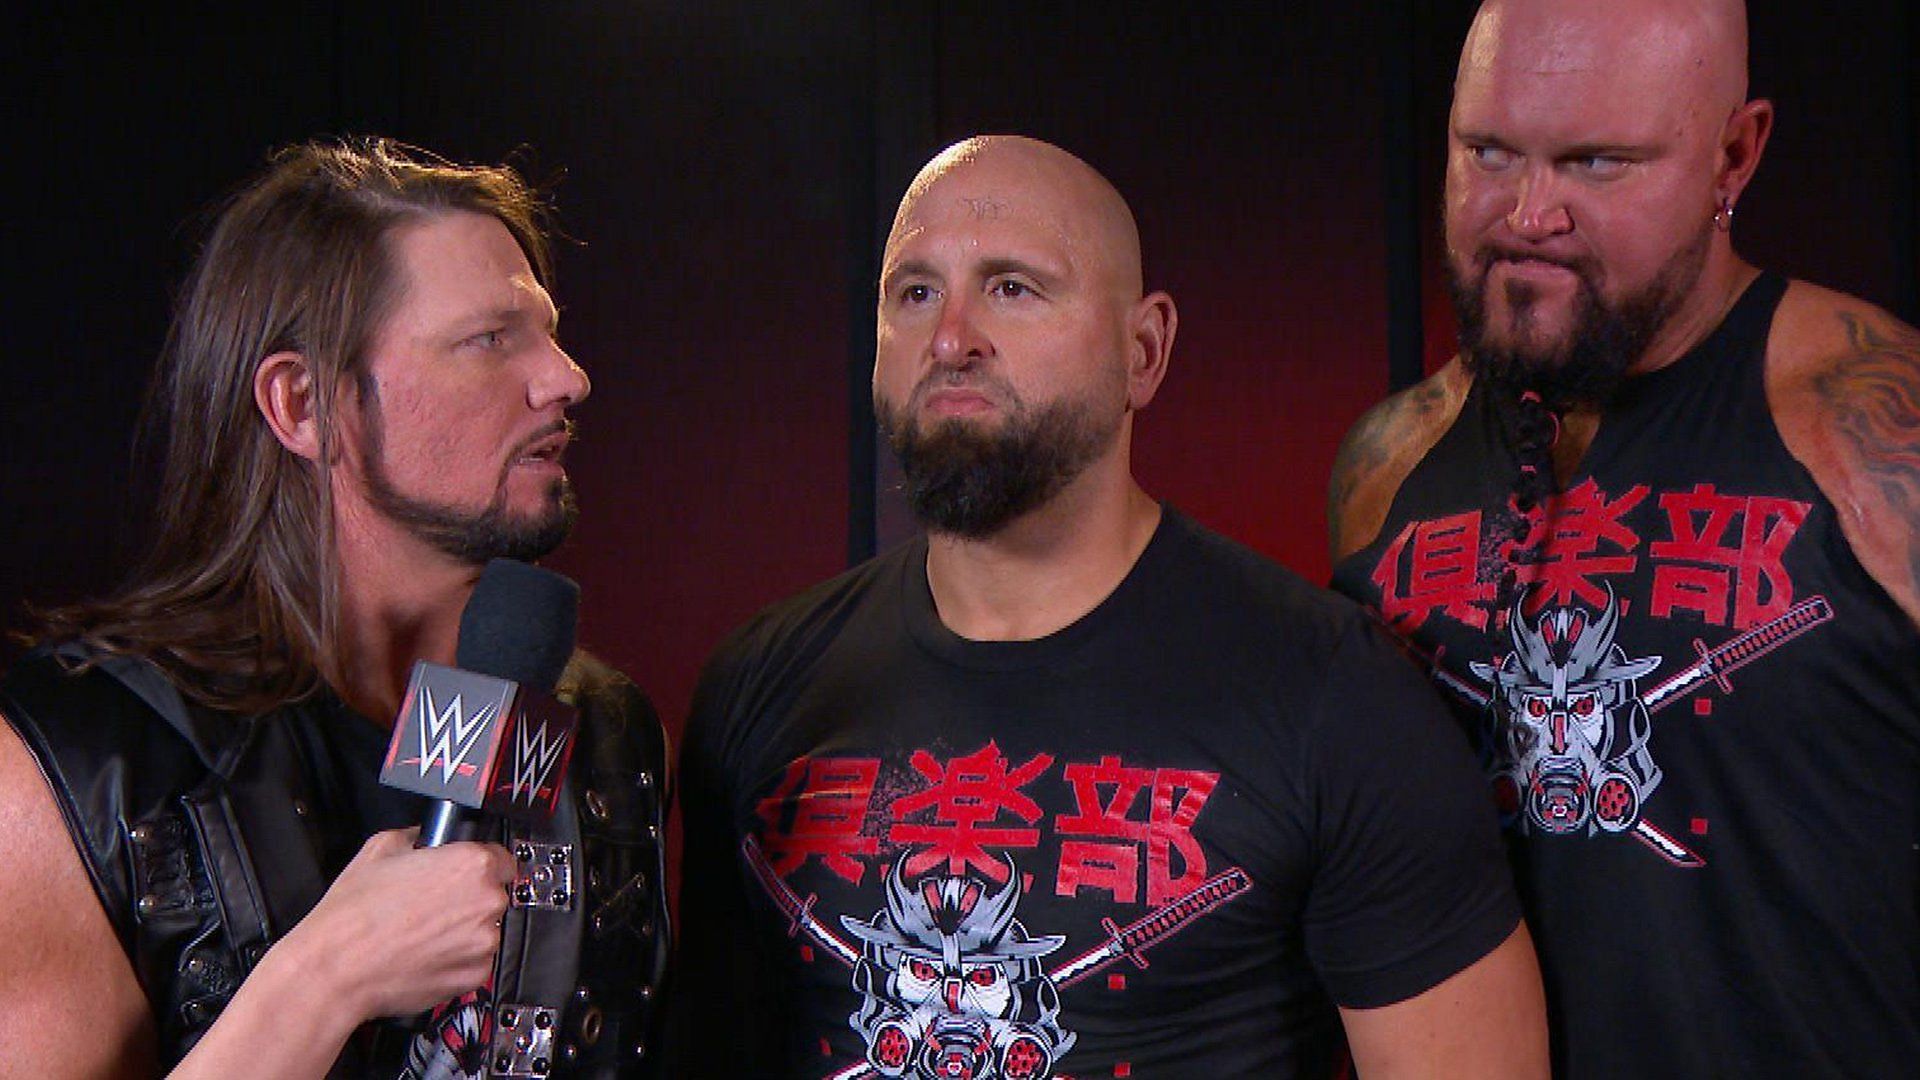 AJ Styles, Gallows and Anderson were part of The O.C.